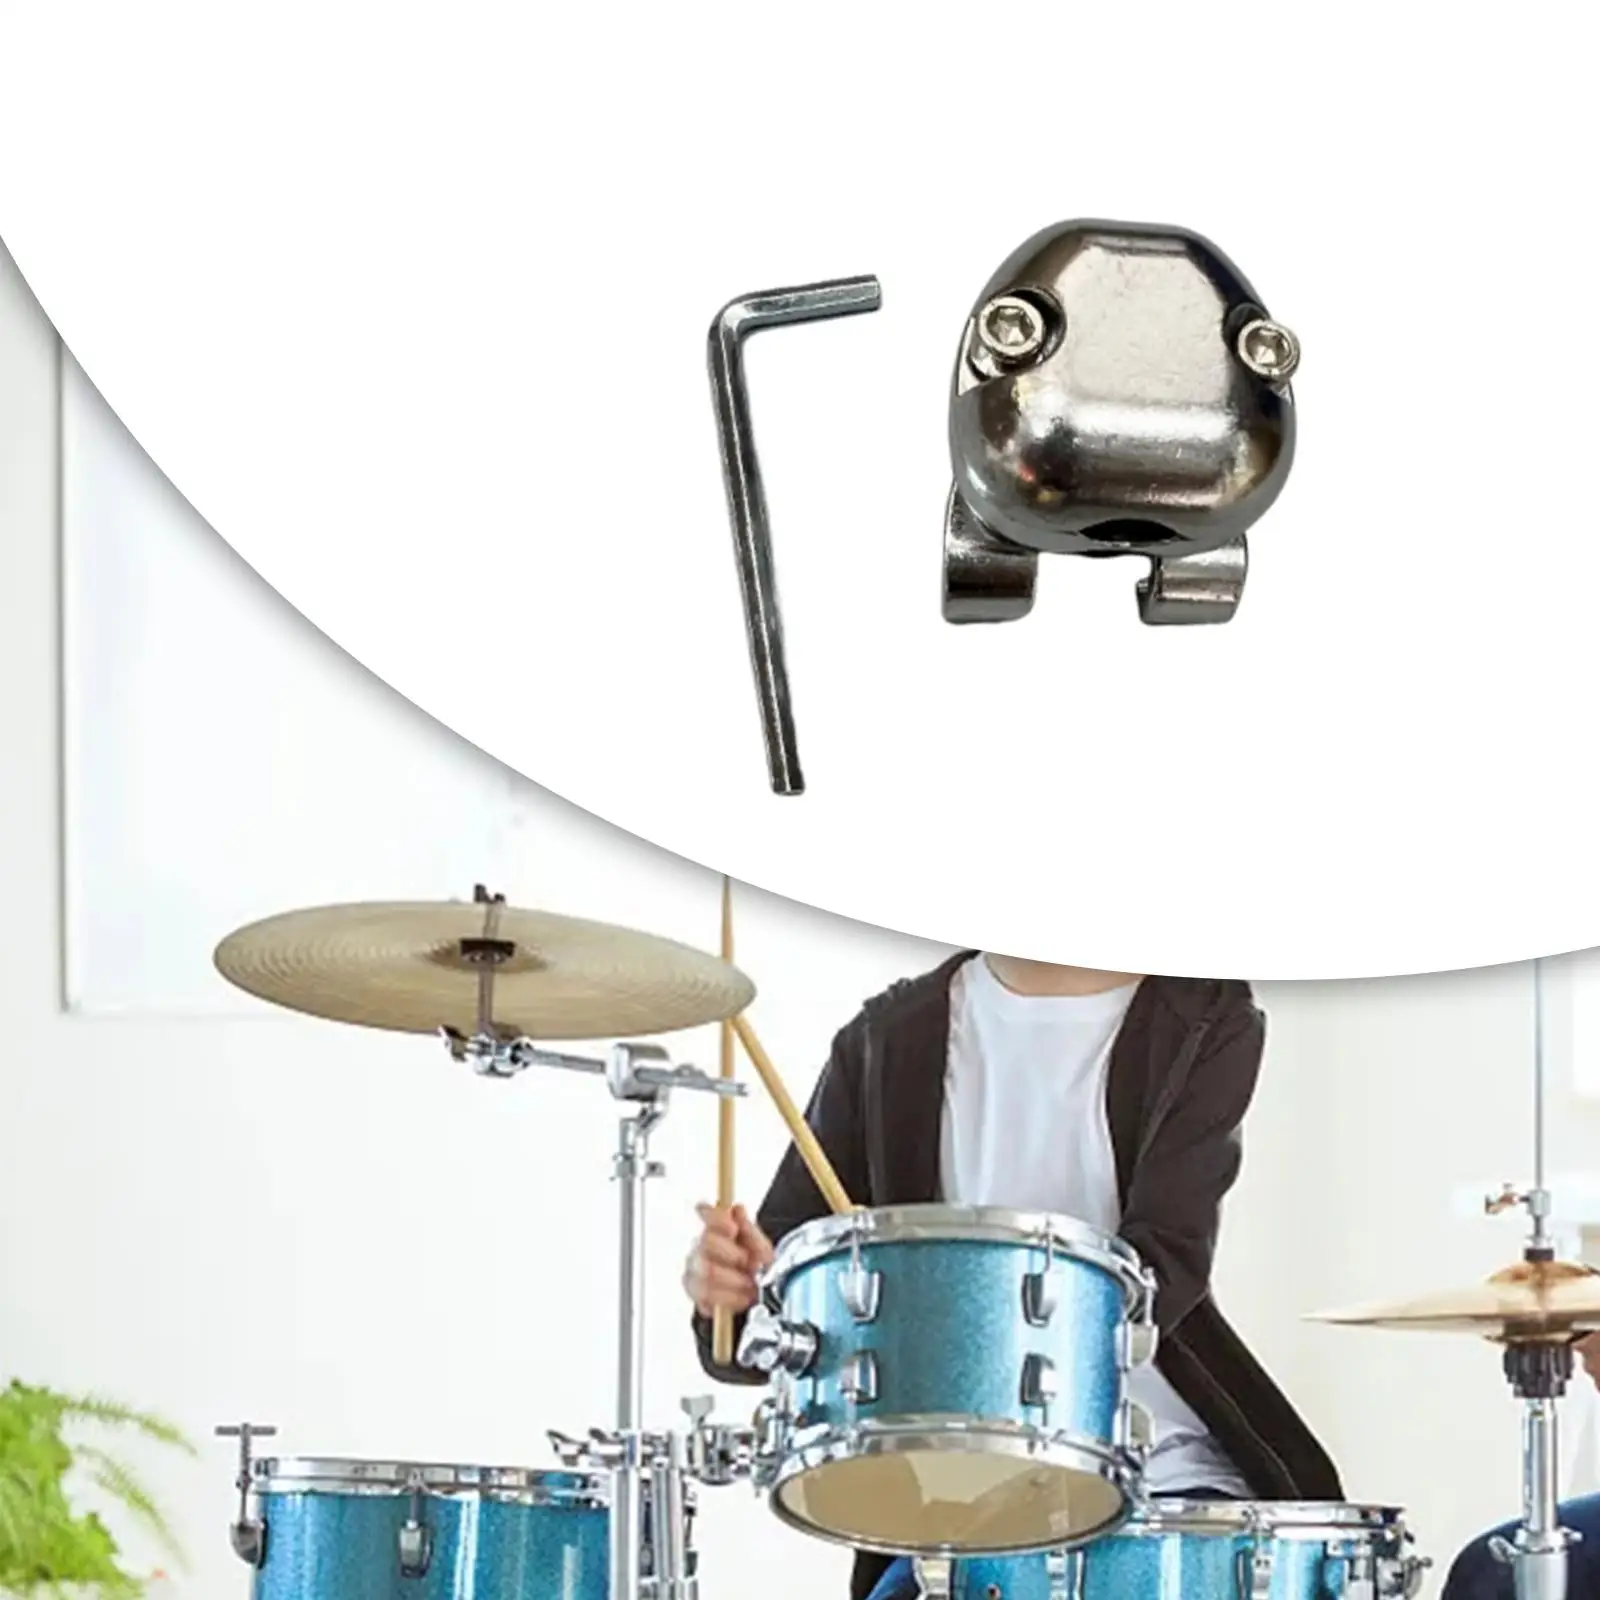 Cymbal Mounting Clamp Professional Connecting Clamp Attachment Portable Hardware Drum Accessories Cymbal Clip Drum Cymbal Clamp